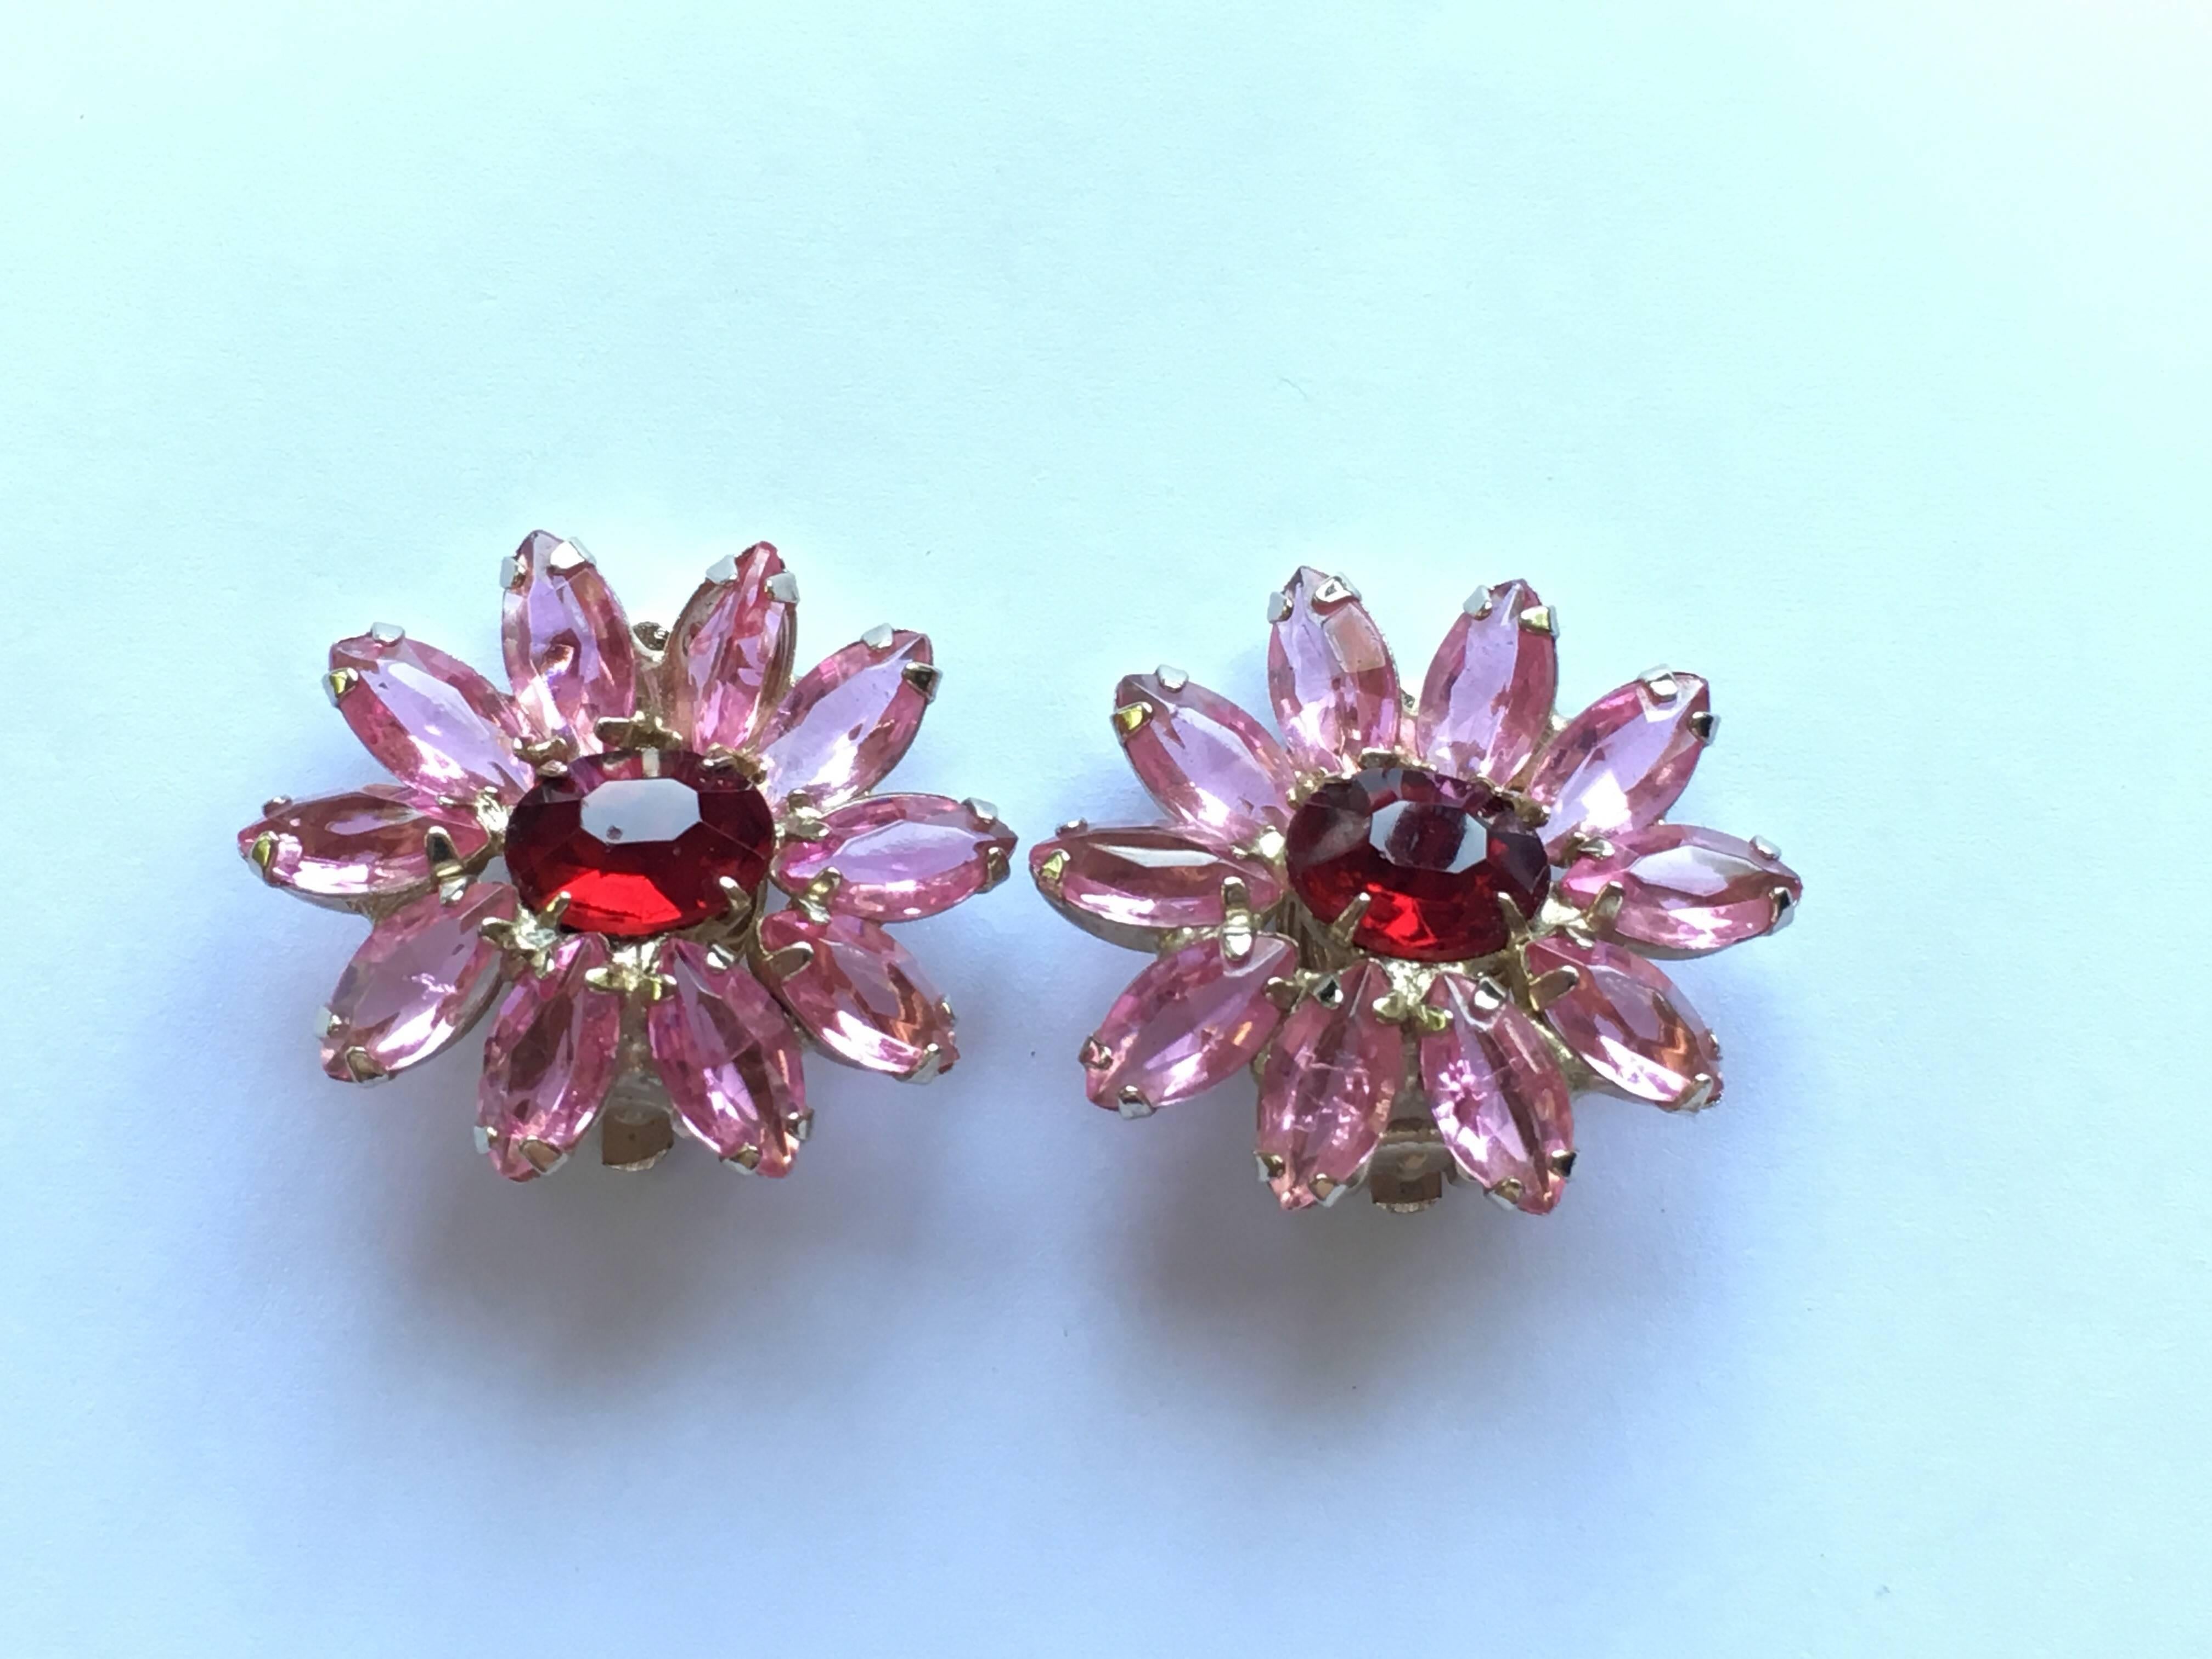 This is a pair of 1960s Weiss flower clip-on earrings. They have pink glass petals and red glass centers. They are in excellent condition and the clips are strong. They are signed 'Weiss' on the back of the clips. They measure 1" high x 1